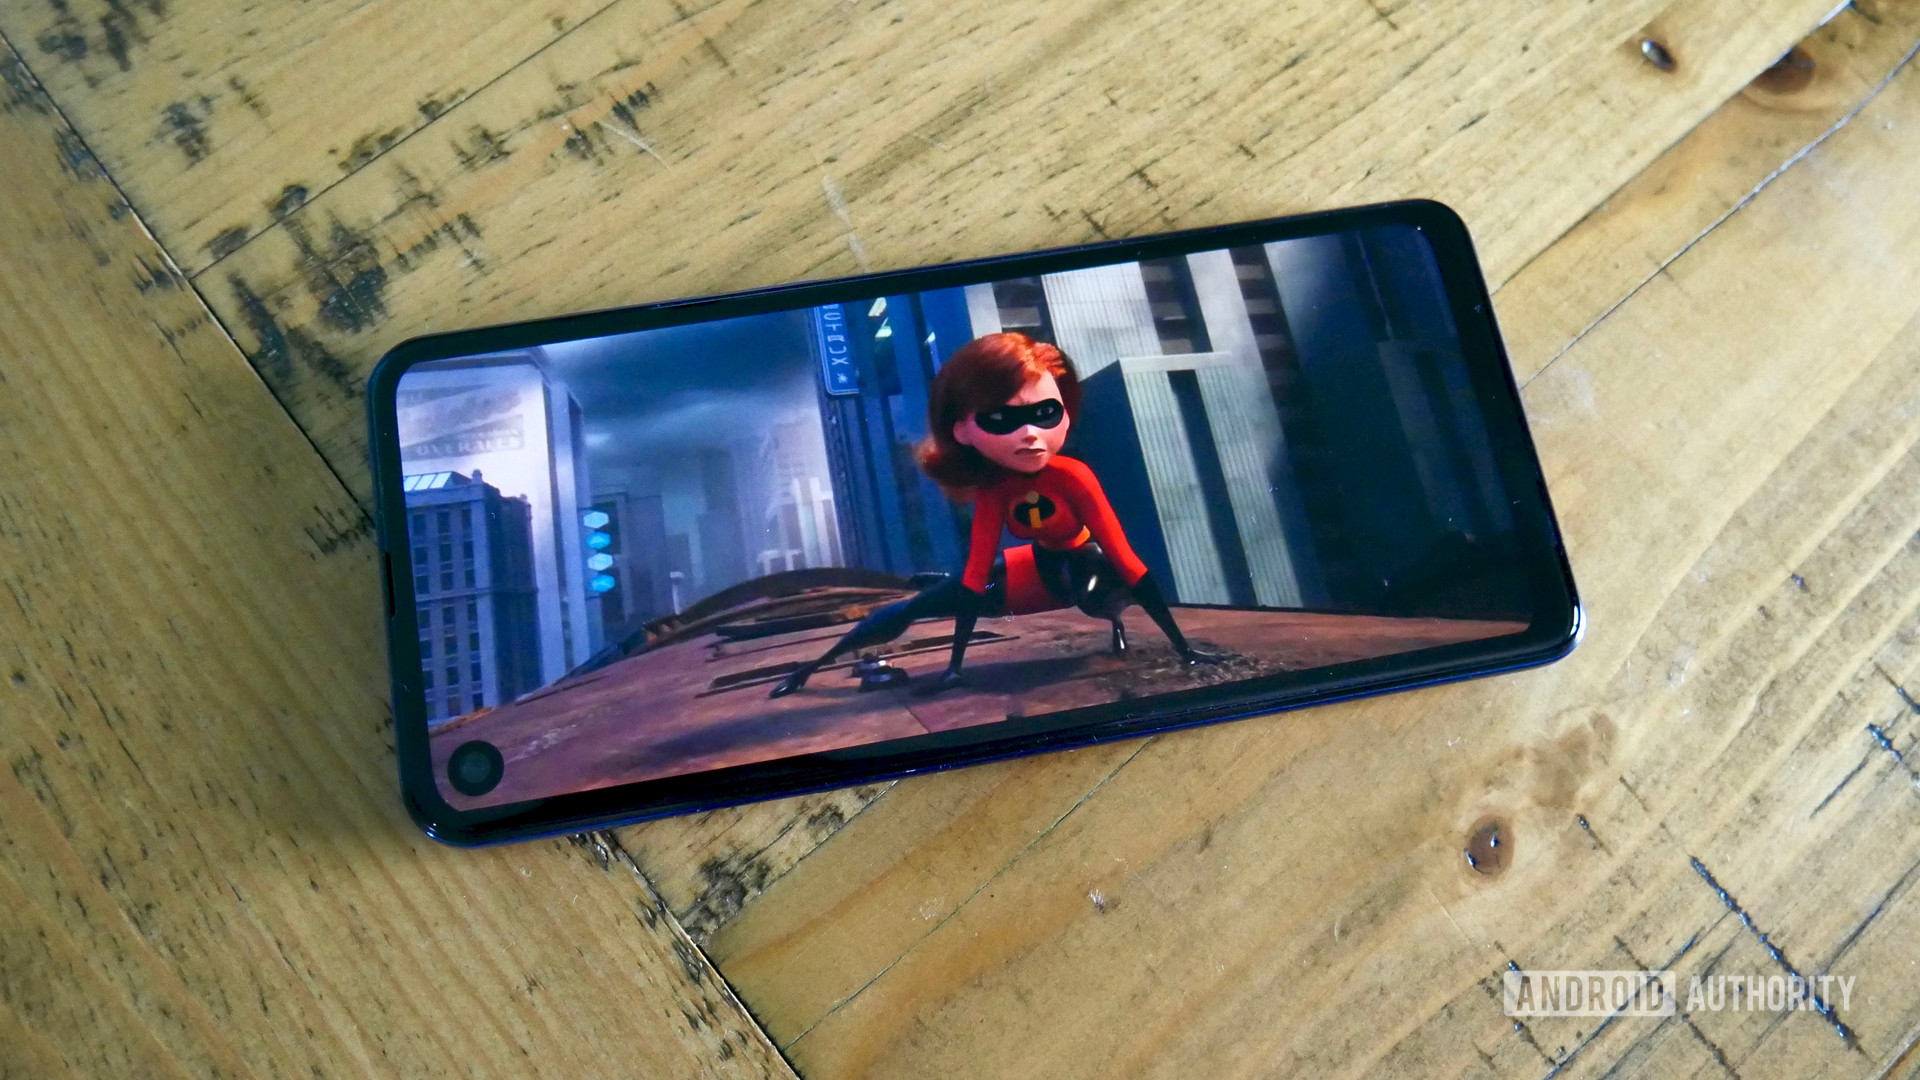 Motorola One Vision Incredibles 2 Netflix with 21:9 aspect ratio